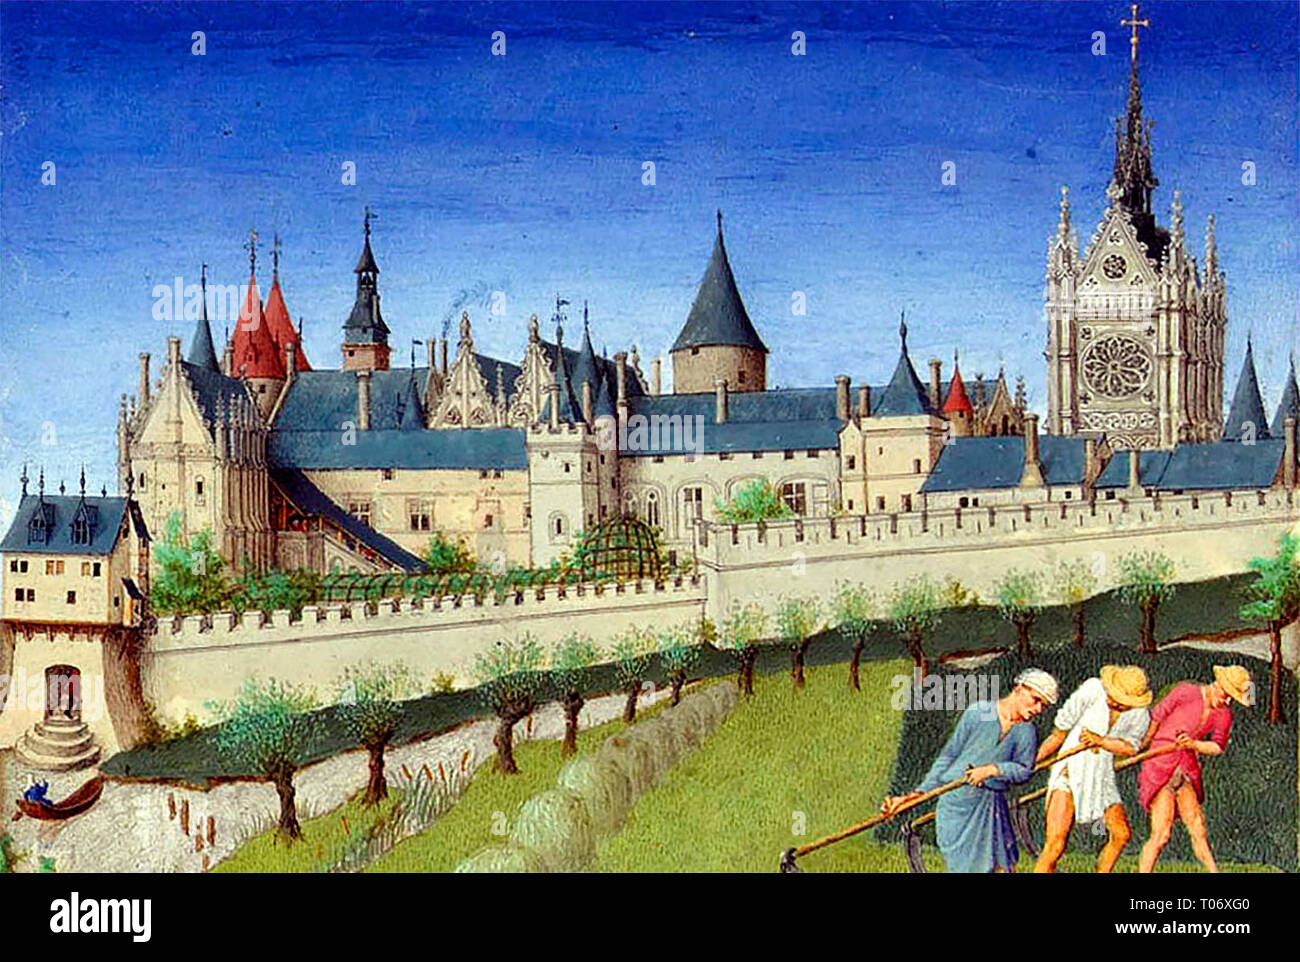 The palace is the Palais de la Cite with the Sainte Chapelle rising above the rooftops during haymaking, circa 1400 Stock Photo